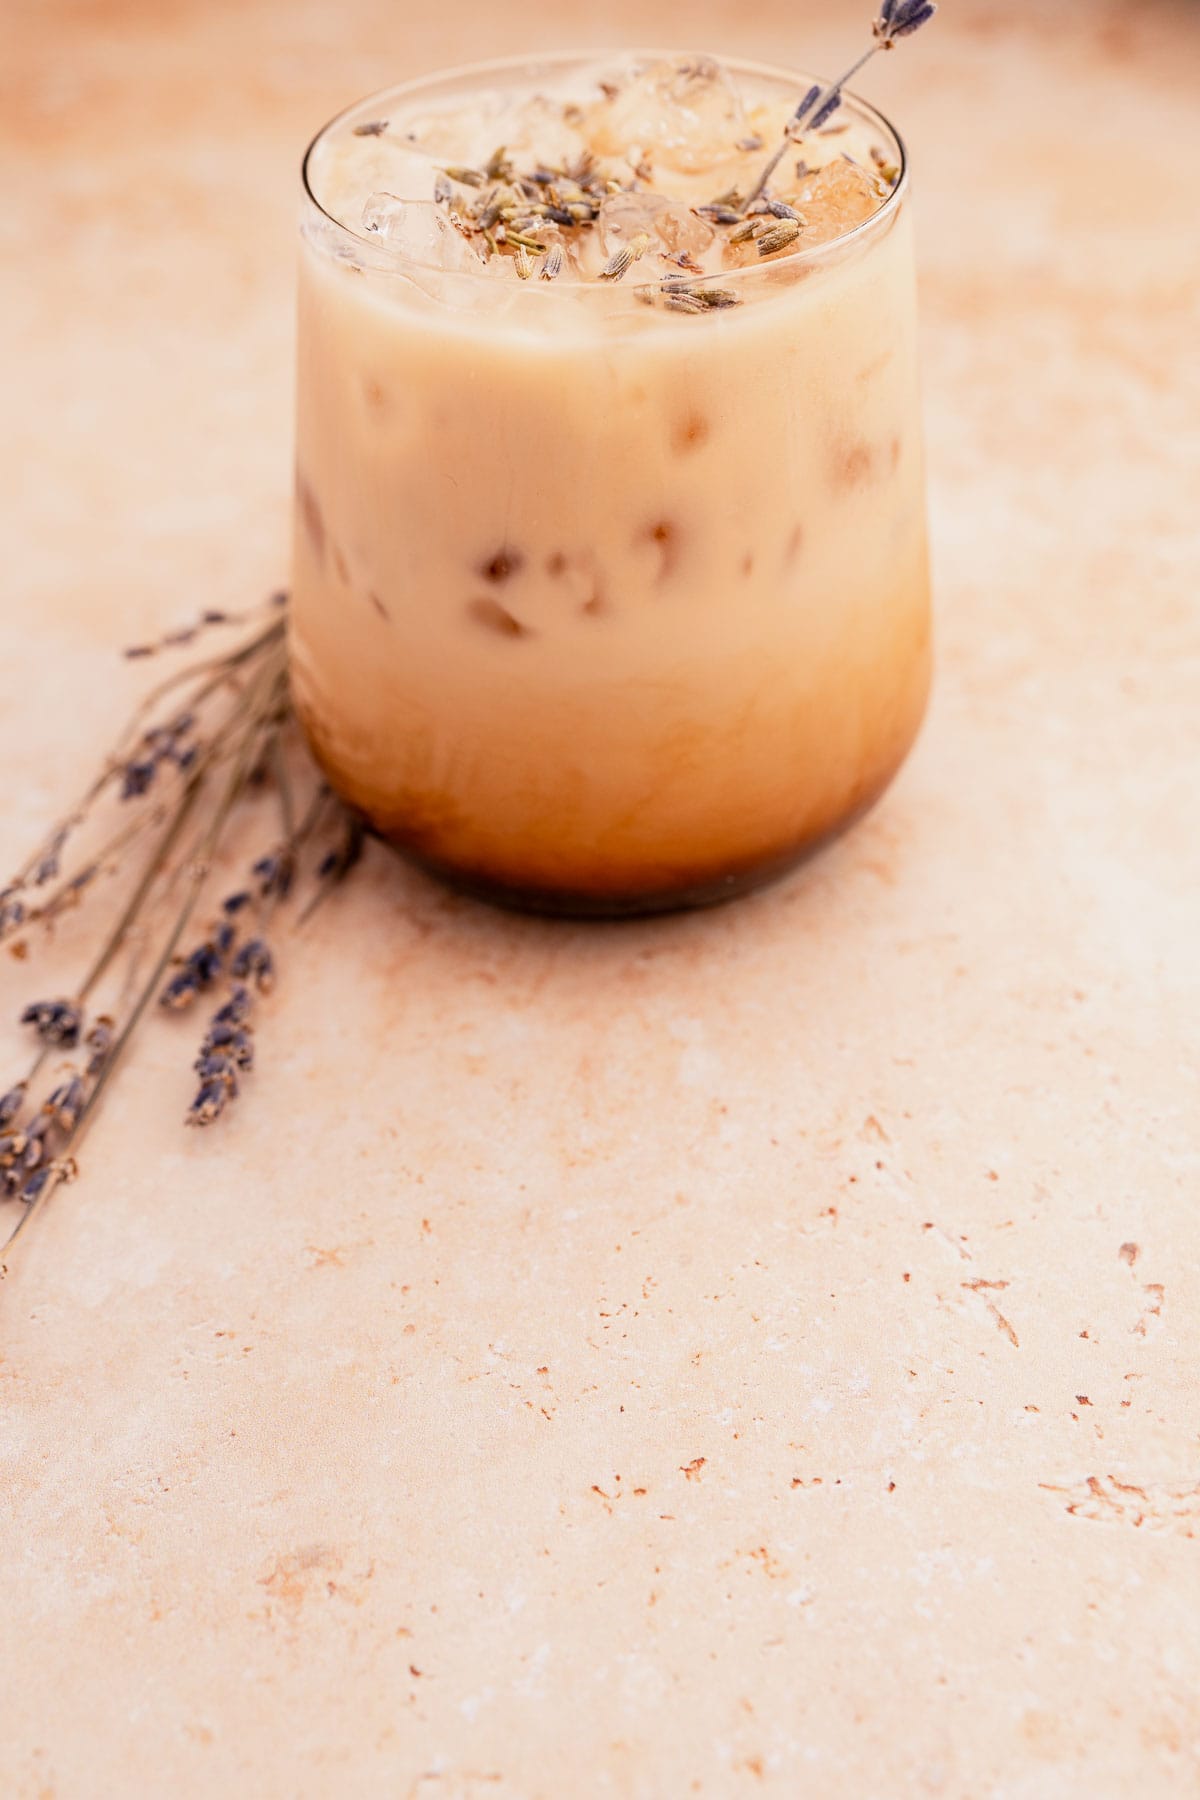 Iced lavender oatmilk latte on a marble surface.